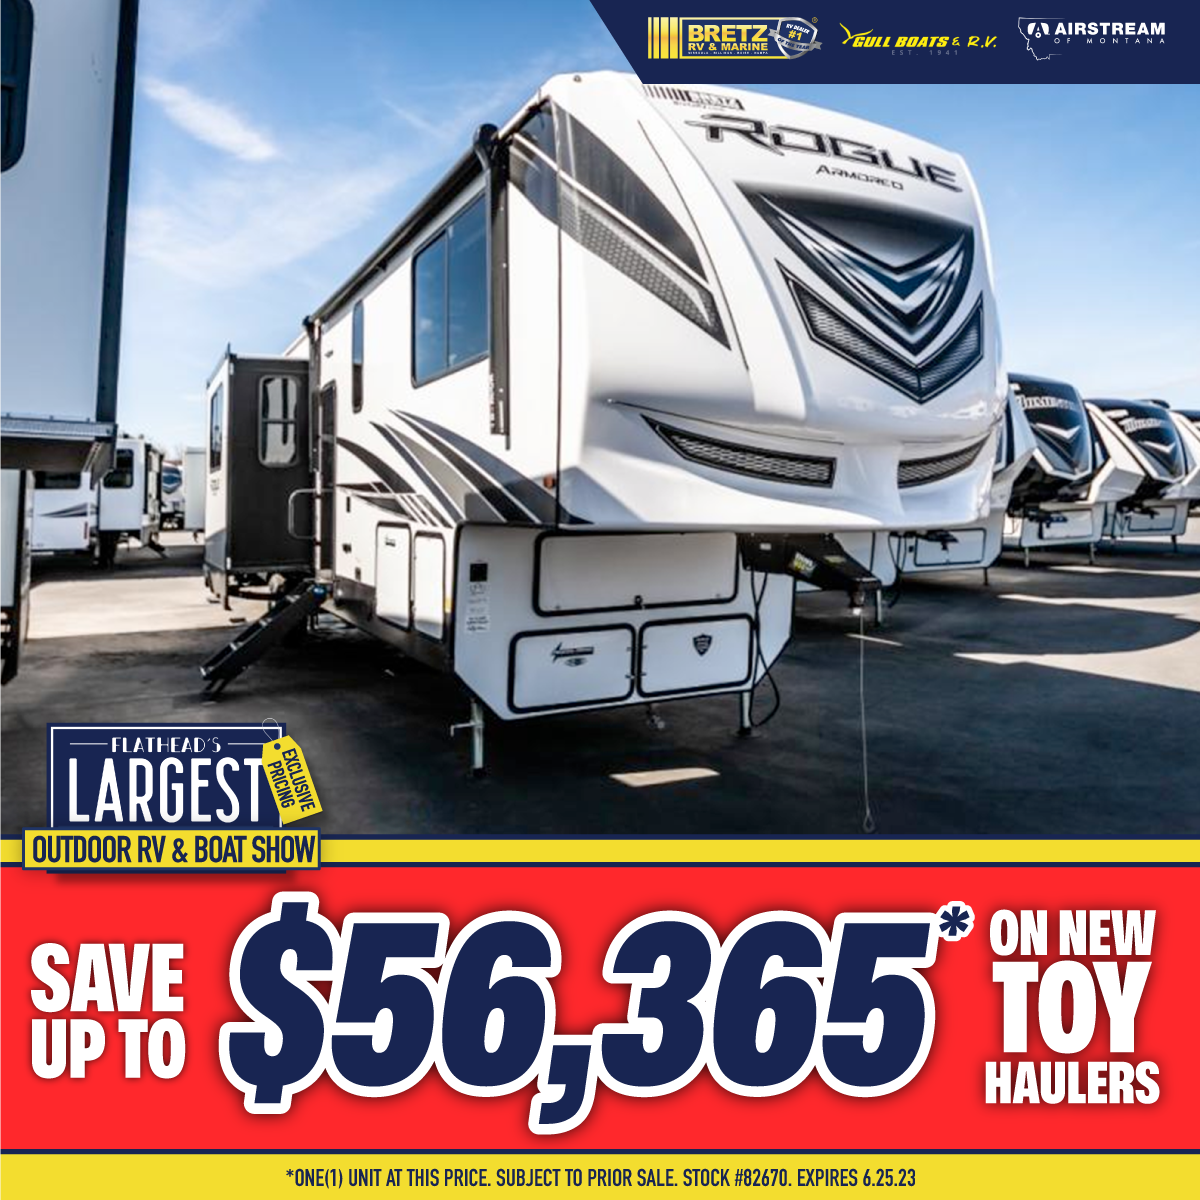 Save up to $56,365* on new toy haulers